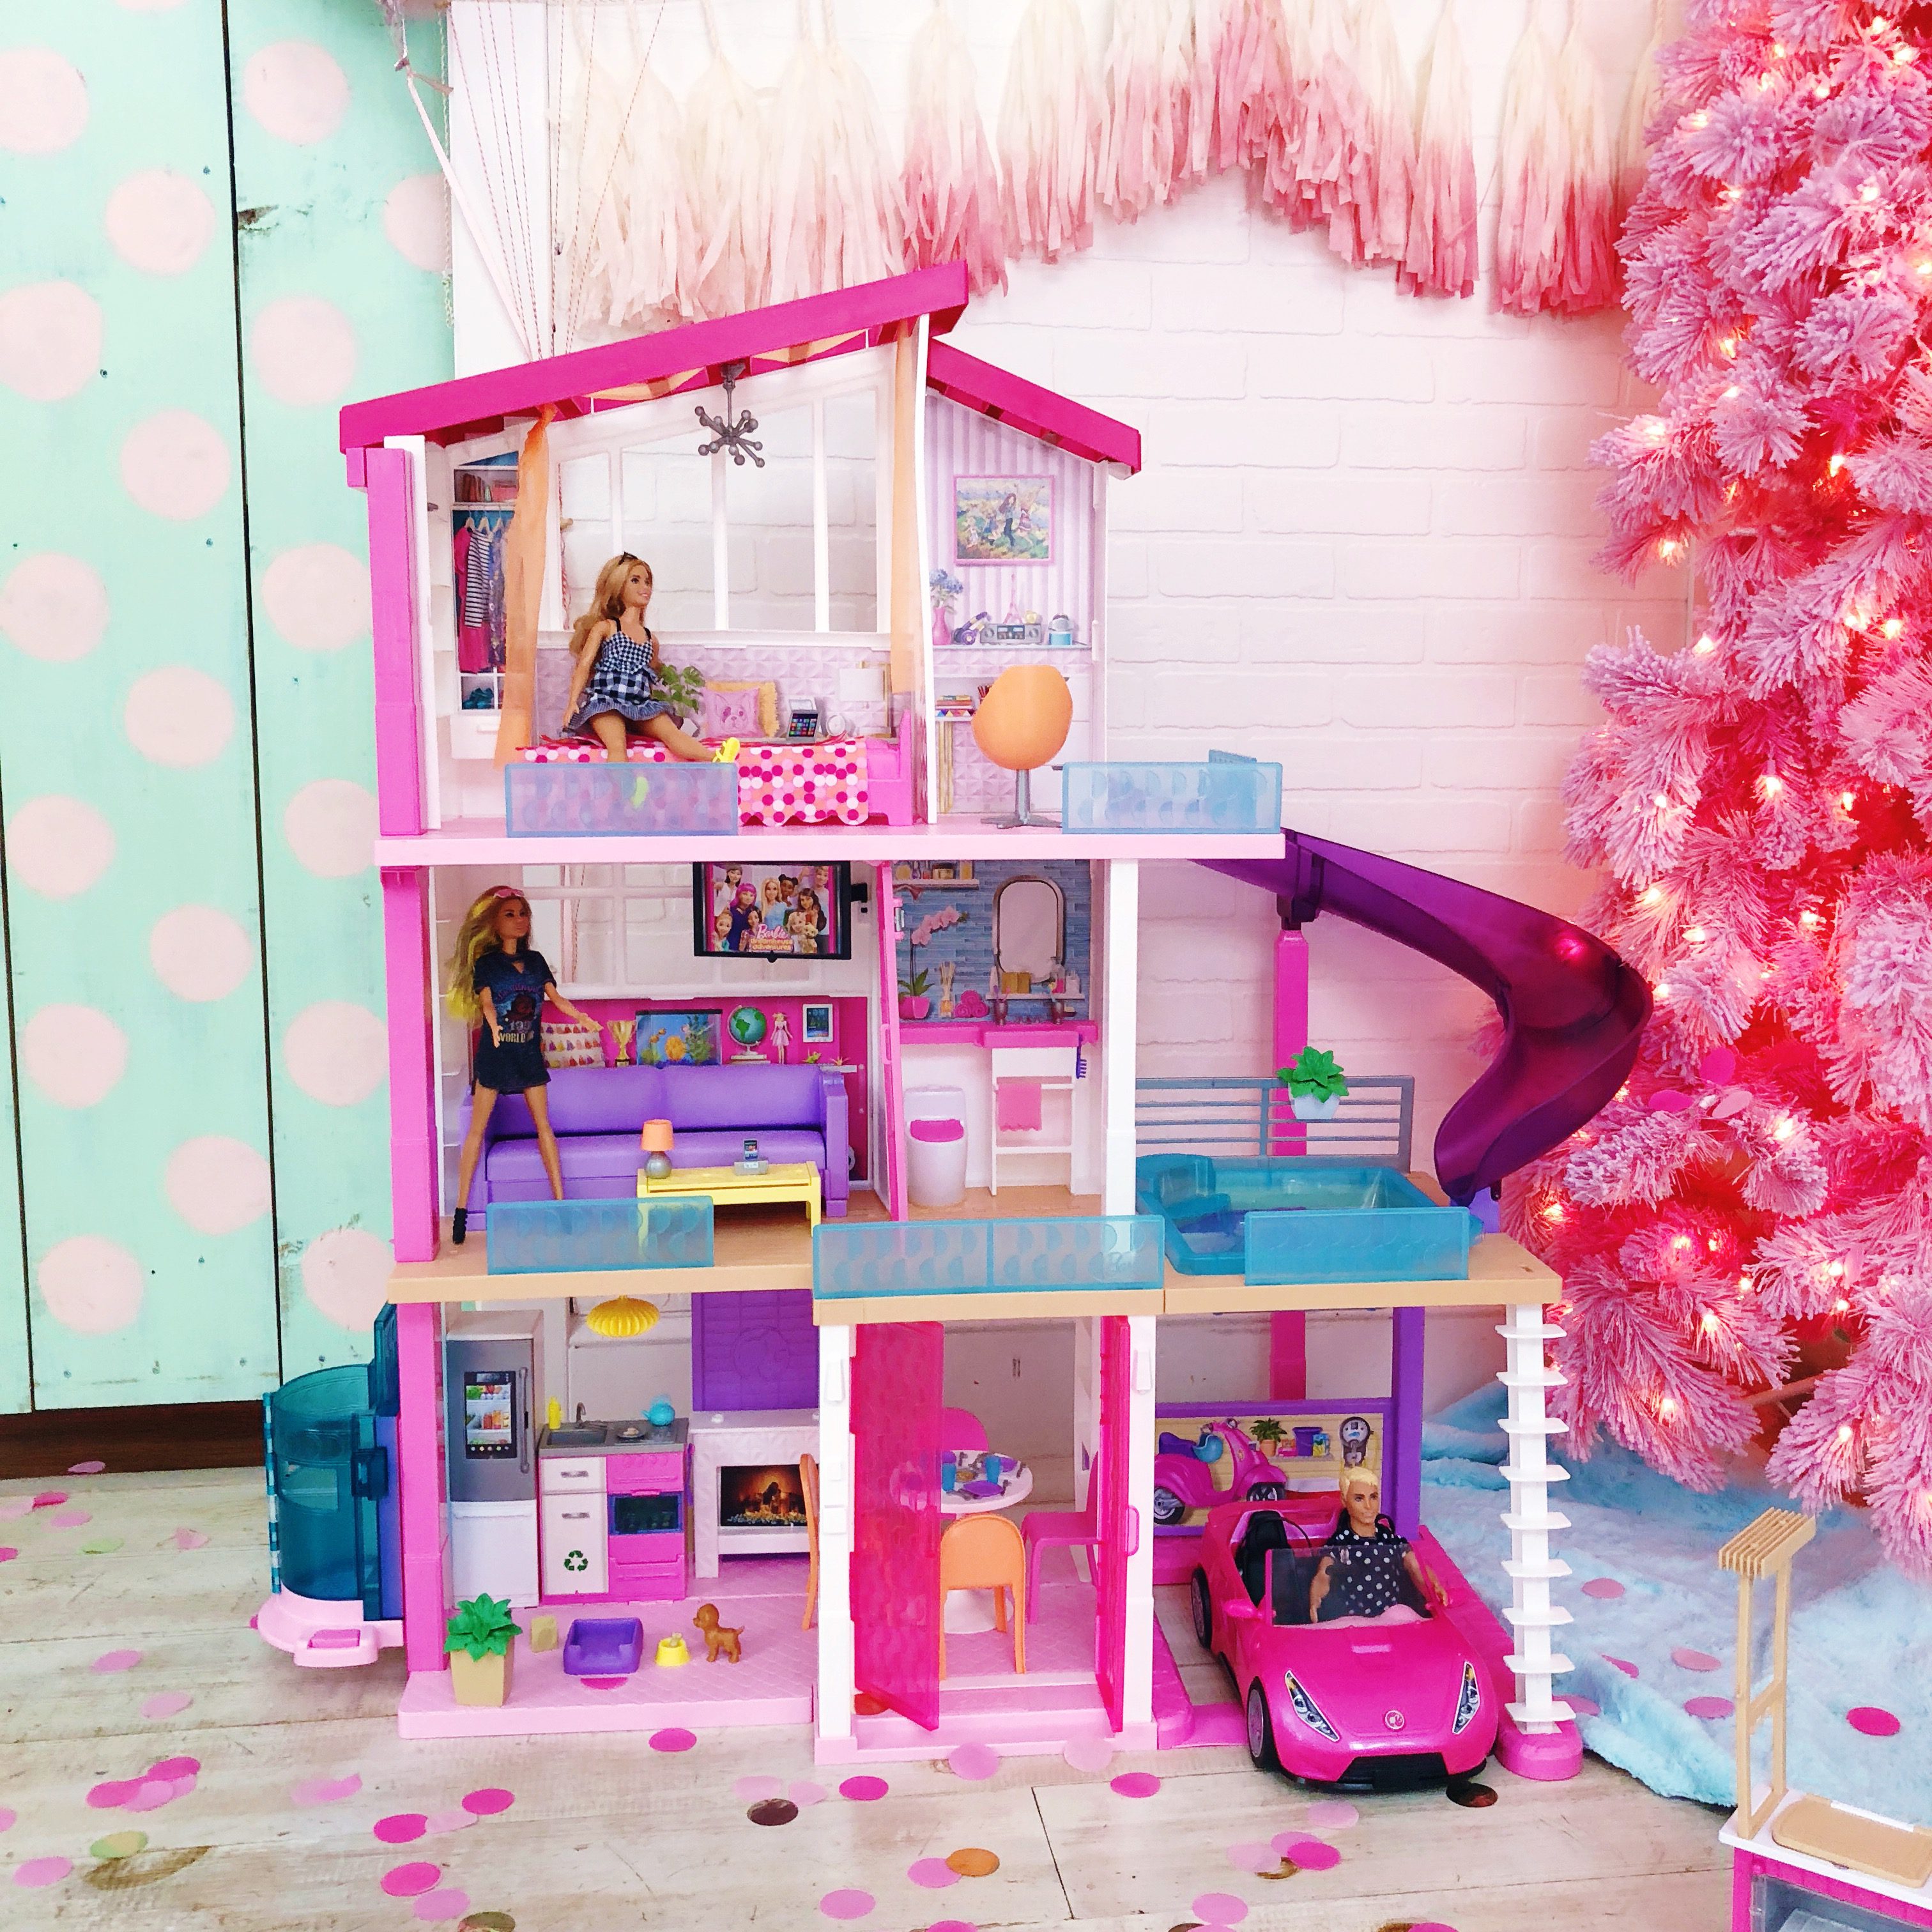 i want to watch barbie dream house